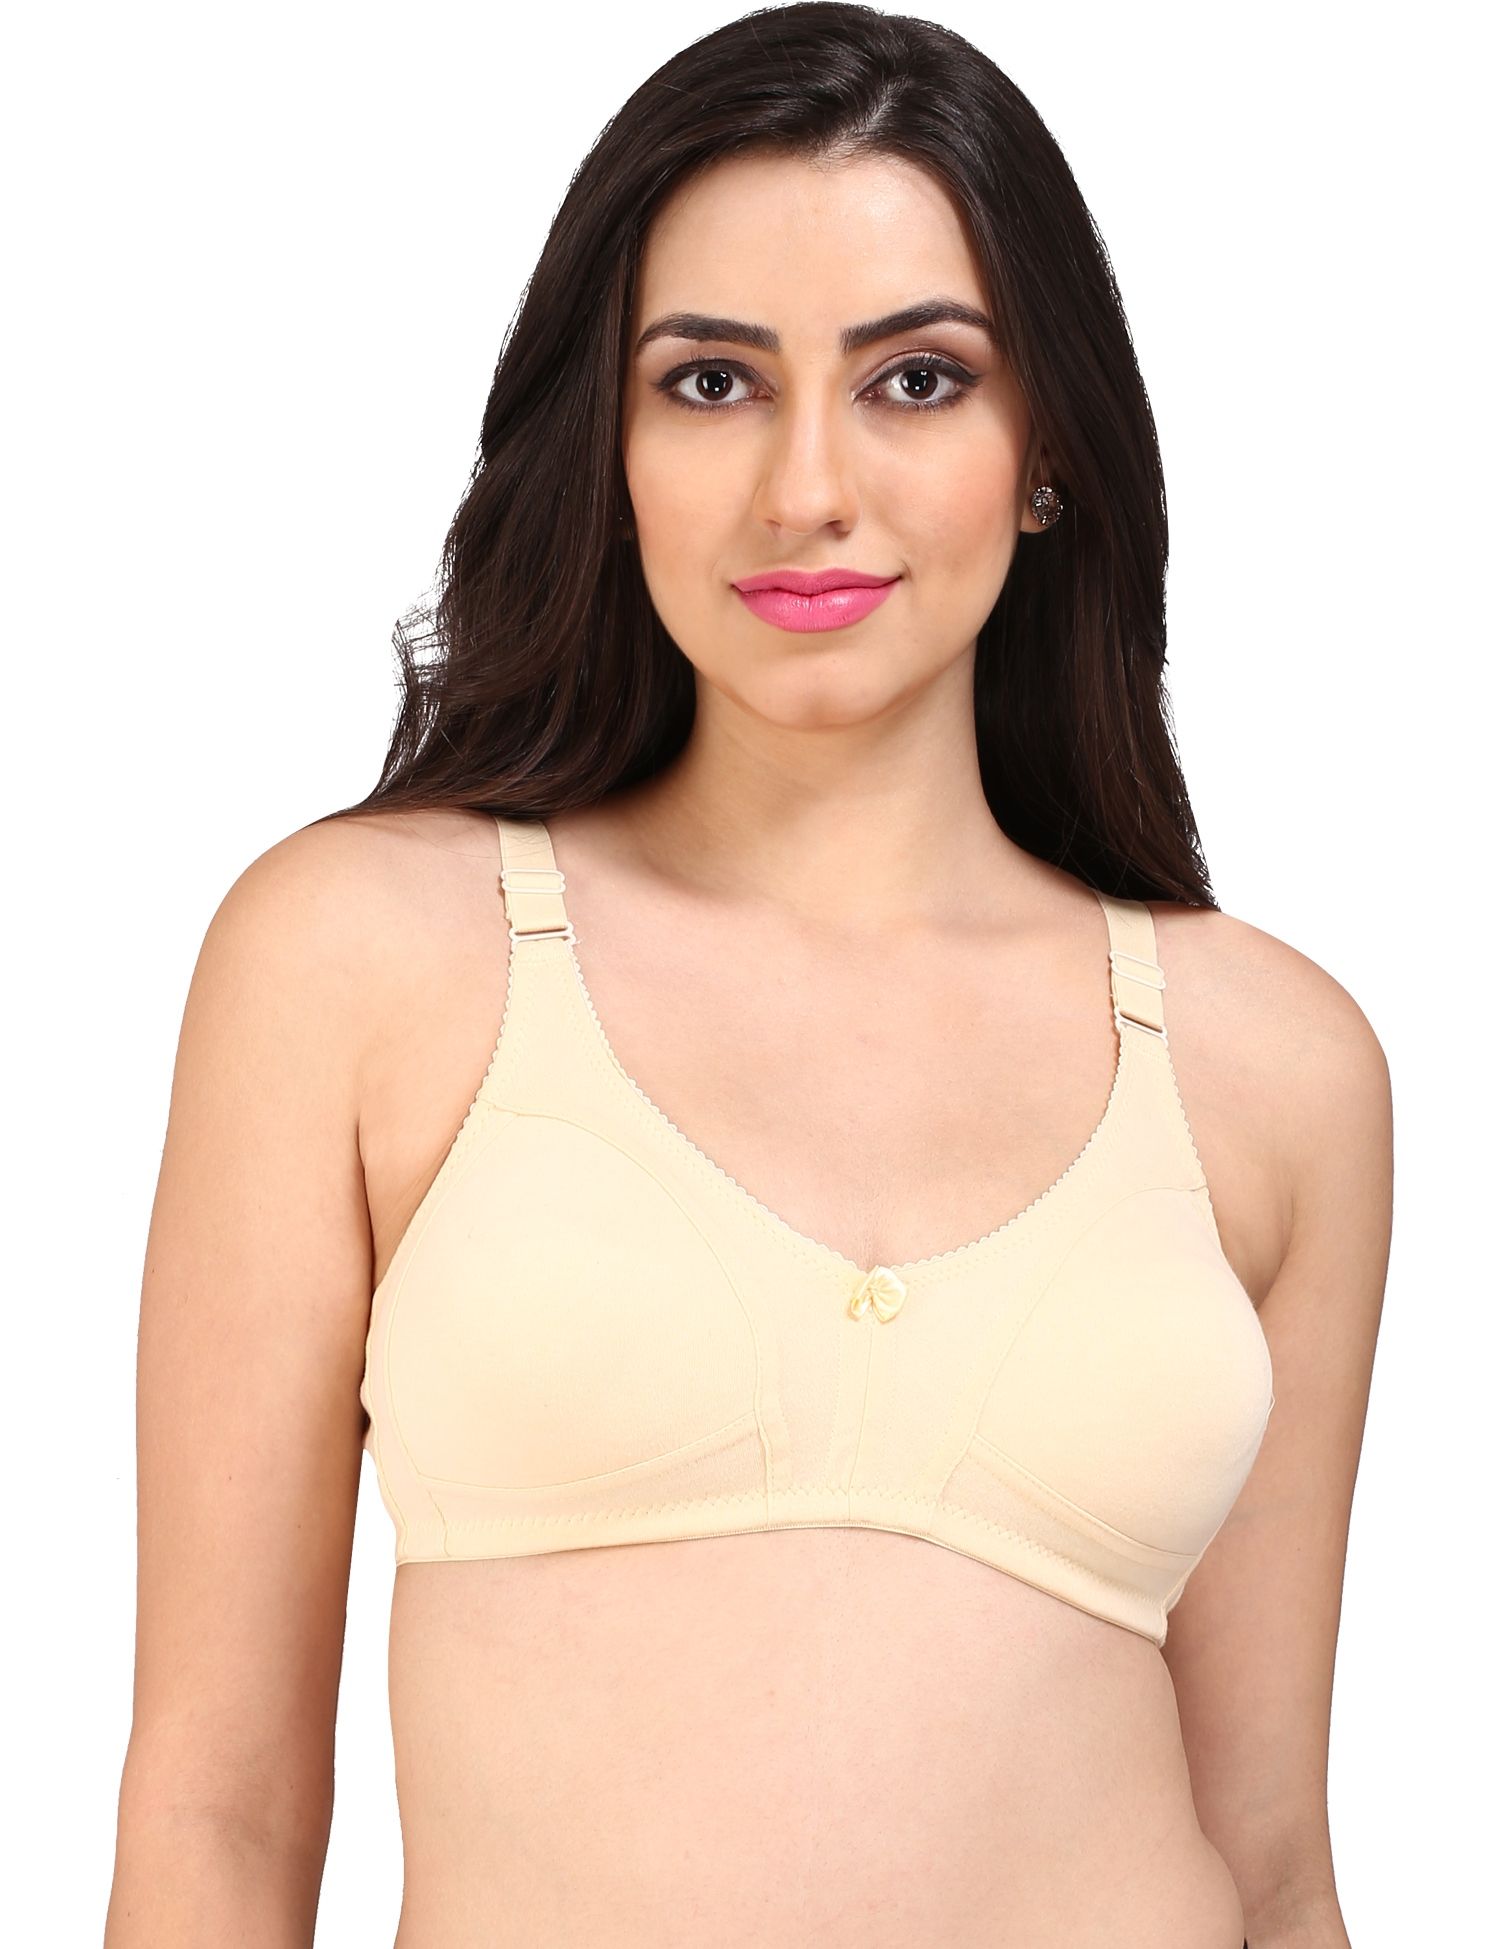 Buy Bralux Women's Dilman Black Color Non-padded Non-wired Regular Cotton  Bra Cup Size B (black_38b) Online at Low Prices in India 